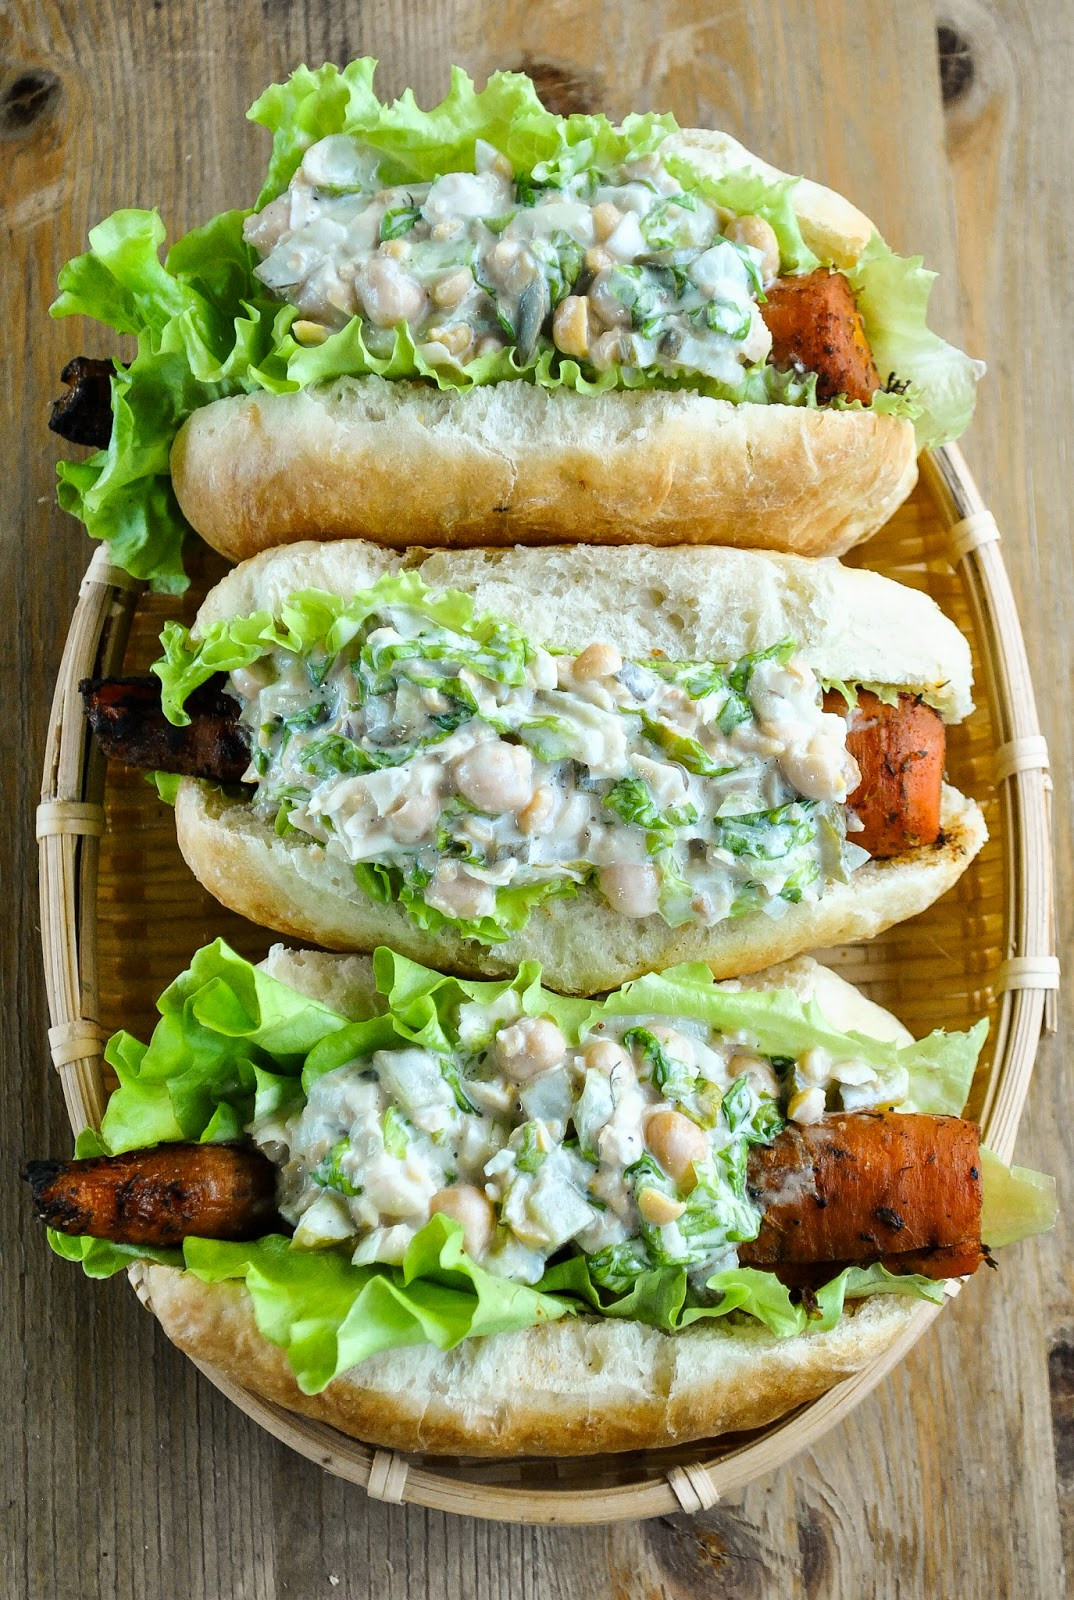 Best Vegan Hot Dogs
 Smoky barbecue carrot hot dogs with creamy chickpea salad